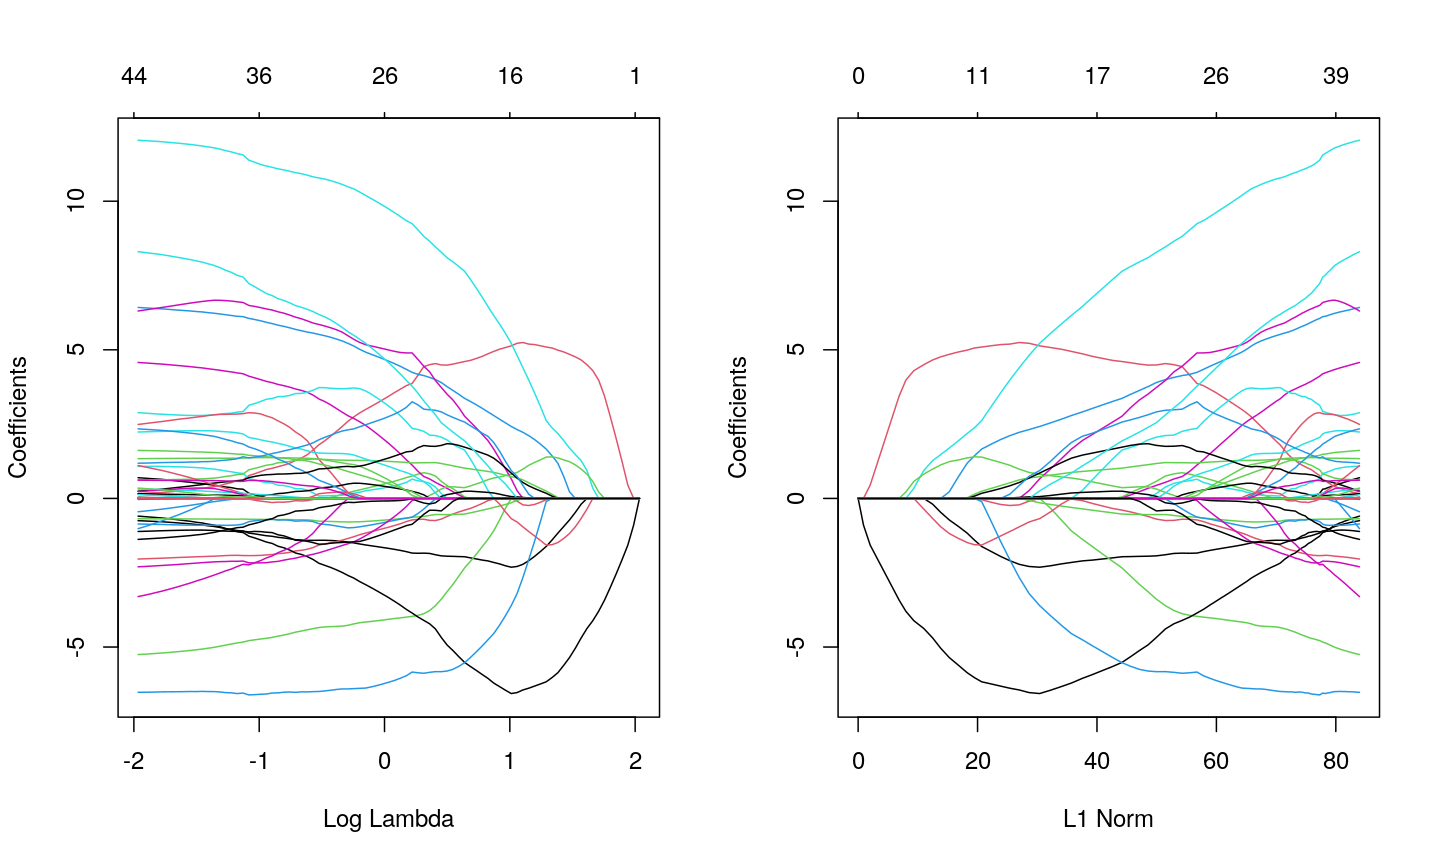 Two line plots side-by-side, showing coefficient values from a LASSO model against log lambda (left) and L1 norm (right). The coefficients, generally, suddenly become zero as log lambda increases or, equivalently, L1 norm decreases. However, some coefficients increase in size before decreasing as log lamdba increases.